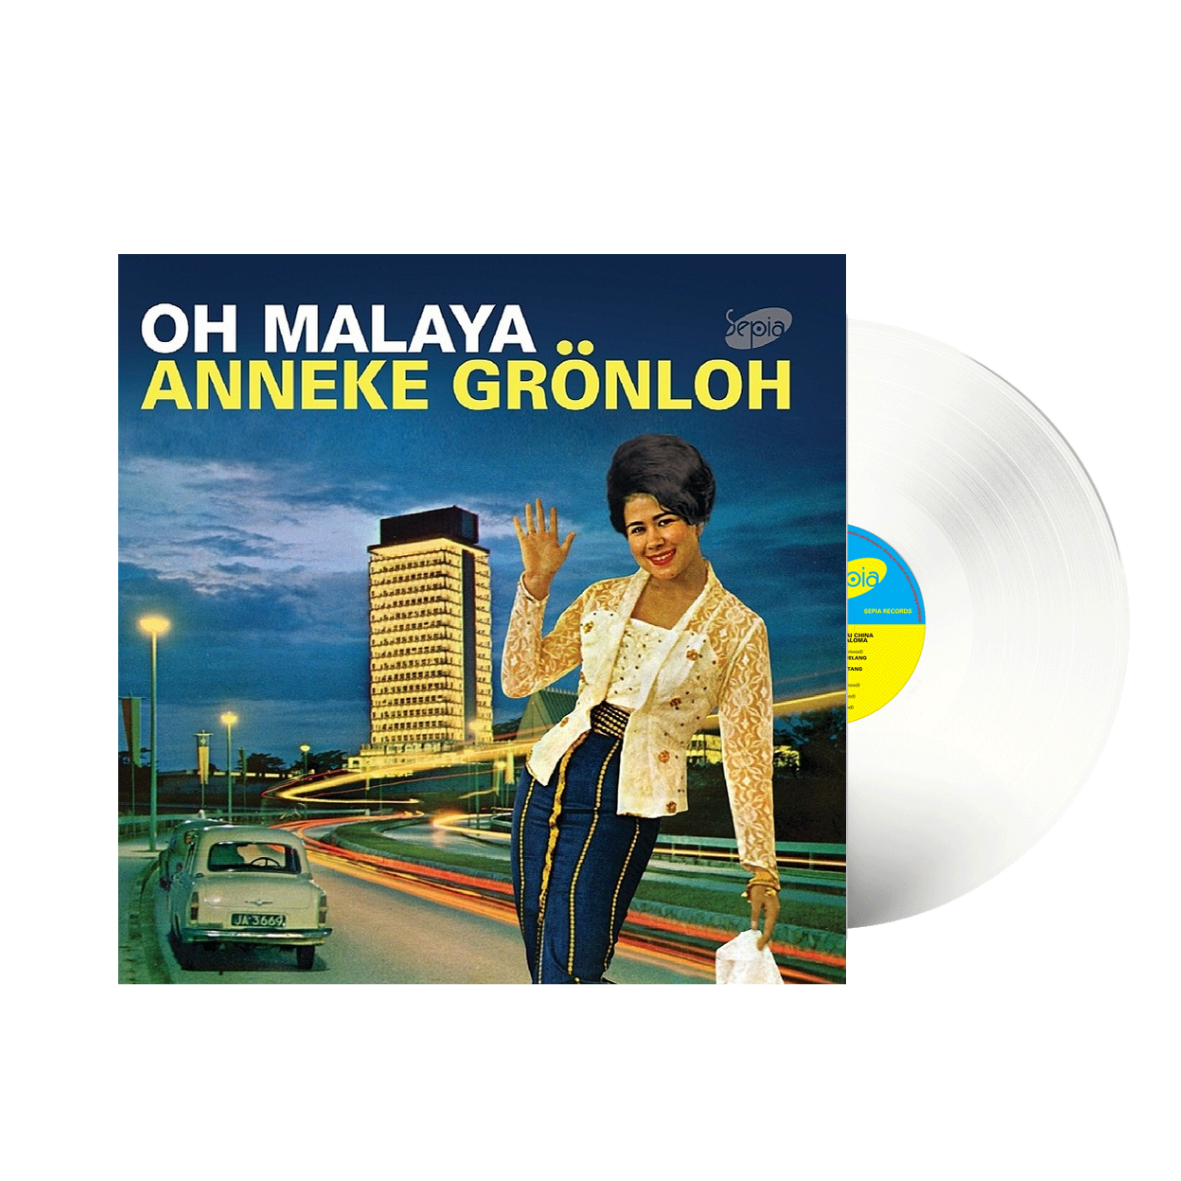 [PRE ORDER] ANNEKE GRONLOH -OH MALAYA: WITH ORCHESTRA DIRECTED BY GER VAN LEEUWEN- LP & CD